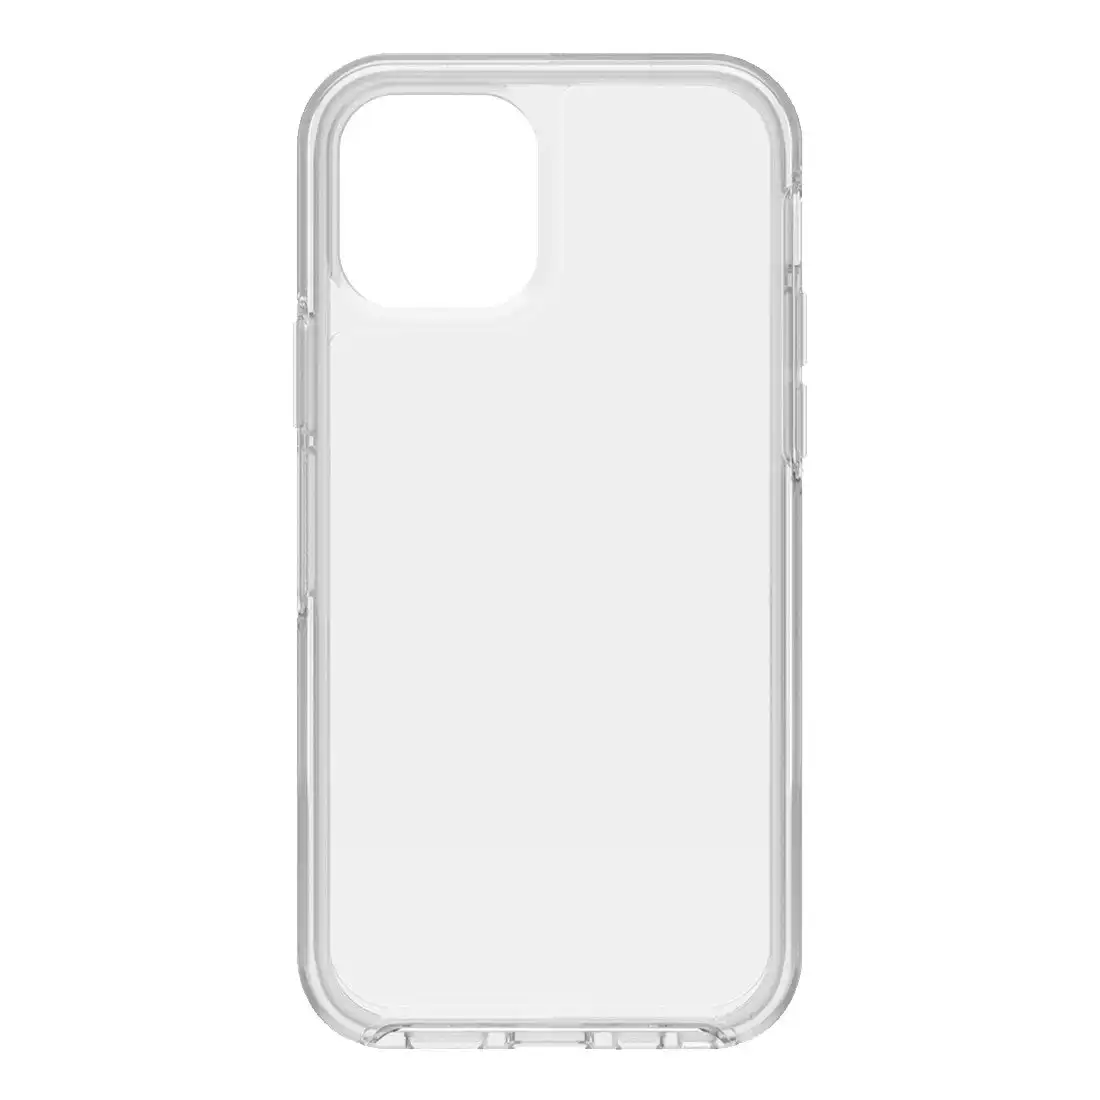 Otterbox Symmetry Case for iPhone 12 Pro Max - Clear